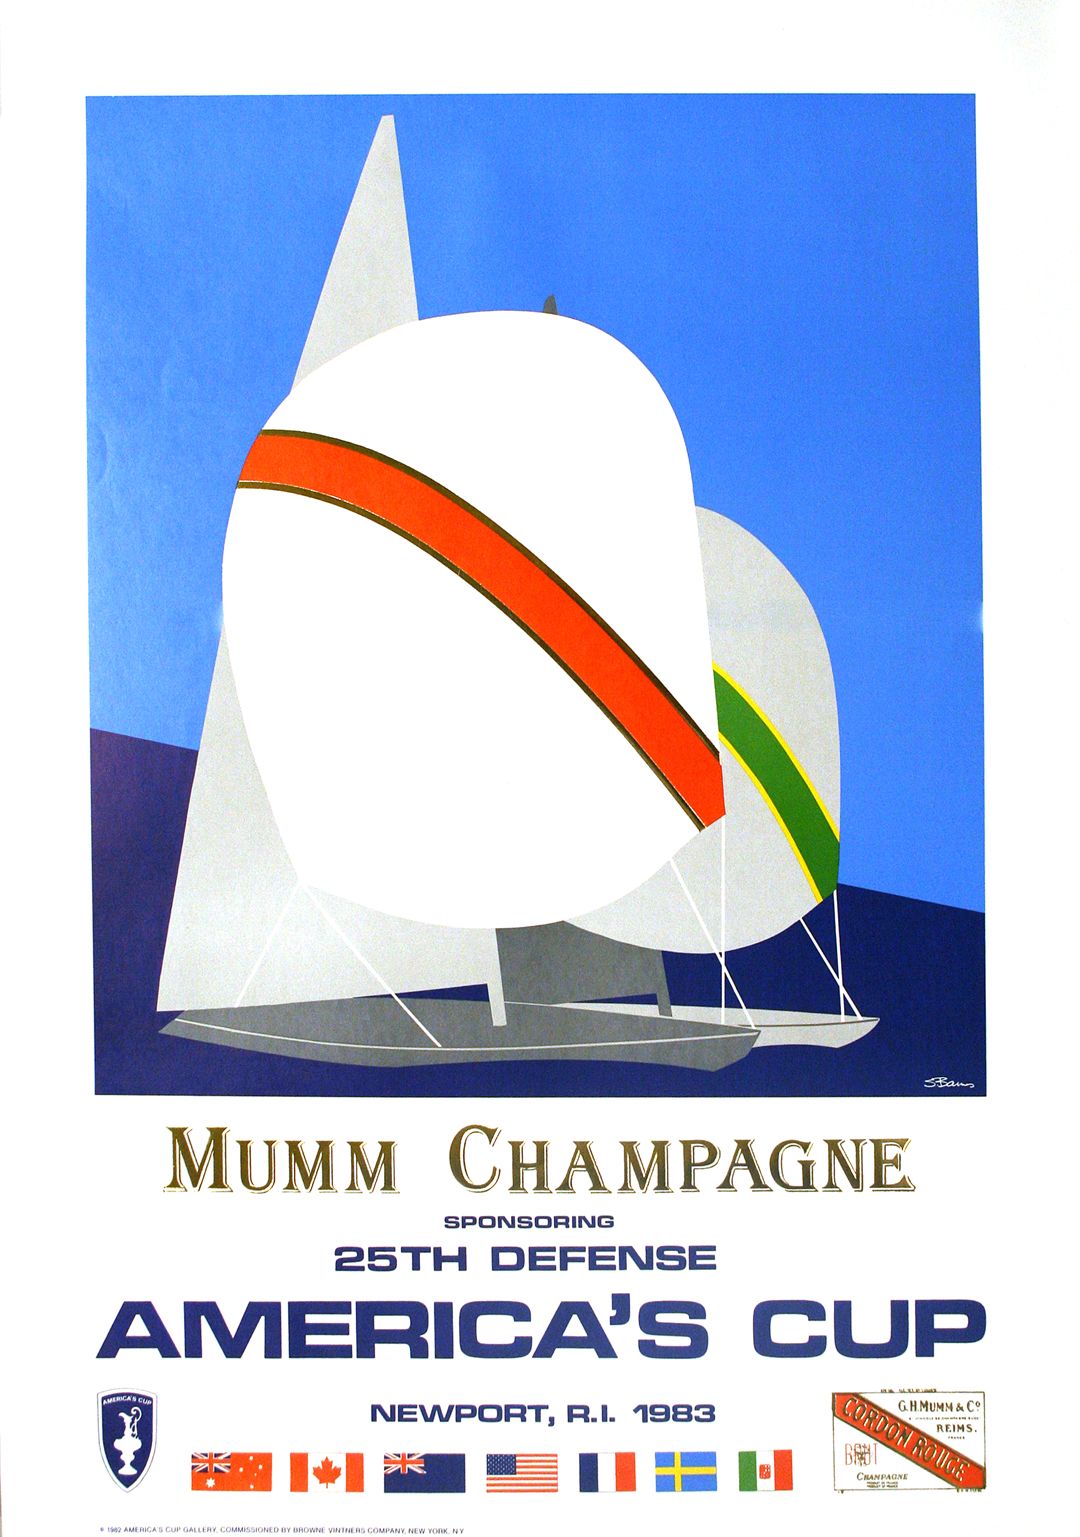 Original Mumm Champagne Poster for 1983 America's Cup Races